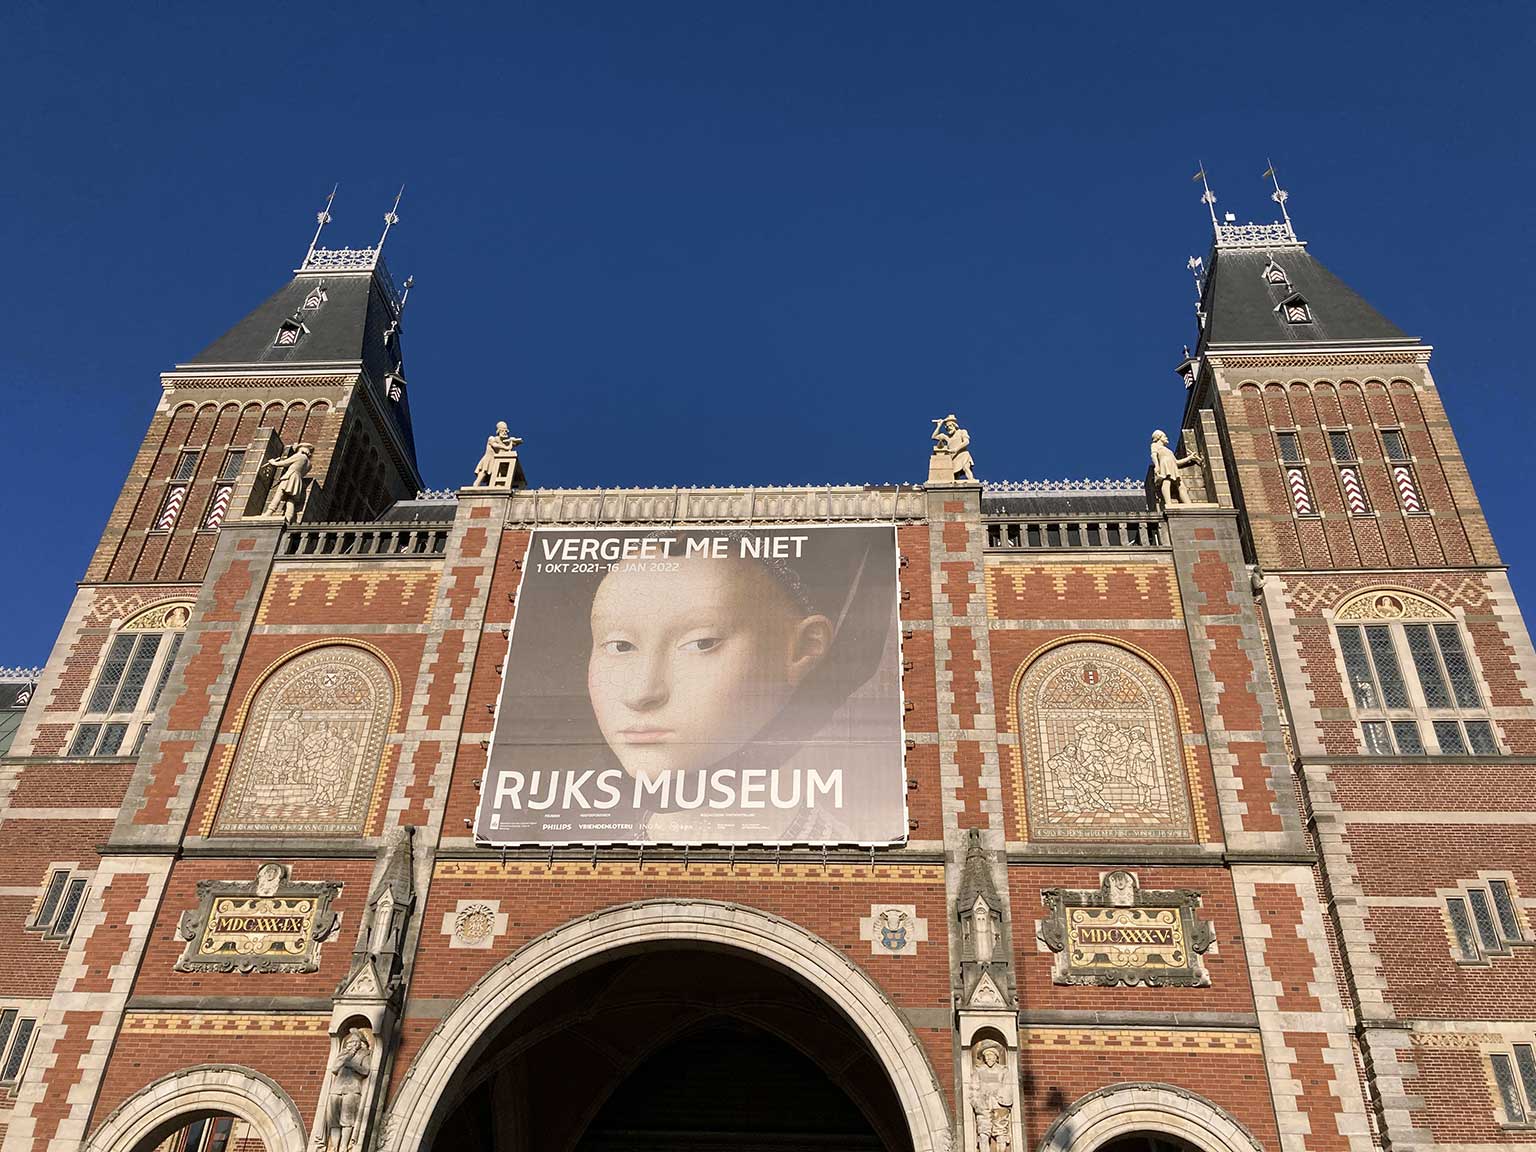 South side of the Rijksmuseum, Amsterdam